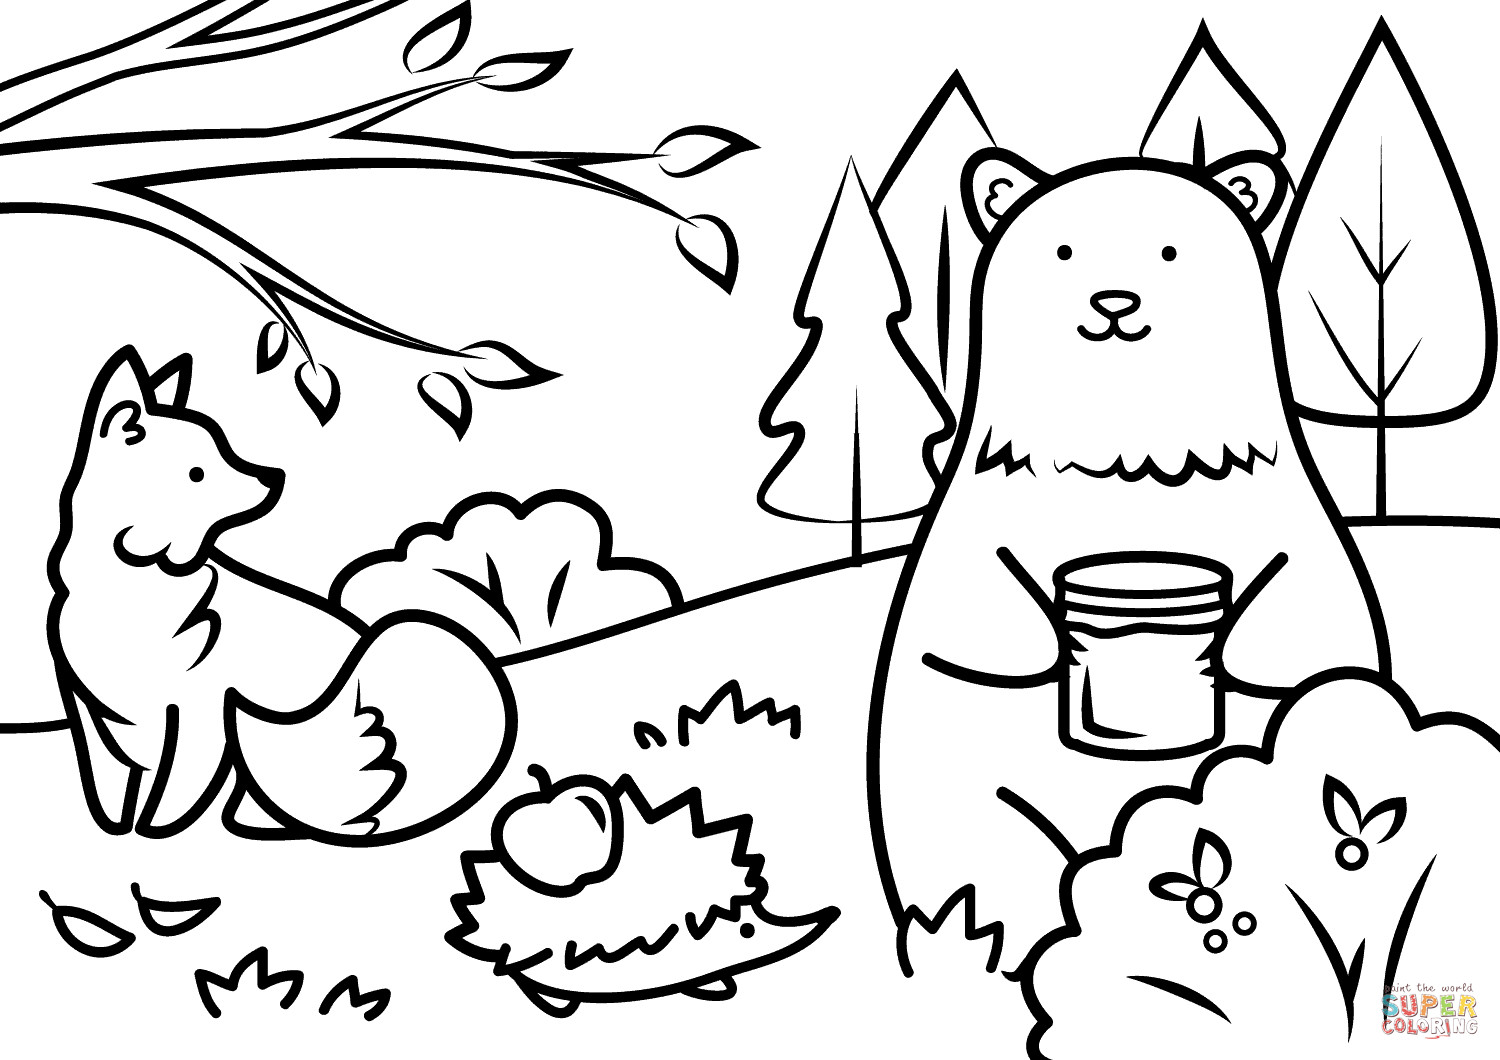 Fun Animal Coloring Pages For Boys
 Autumn Animals coloring page